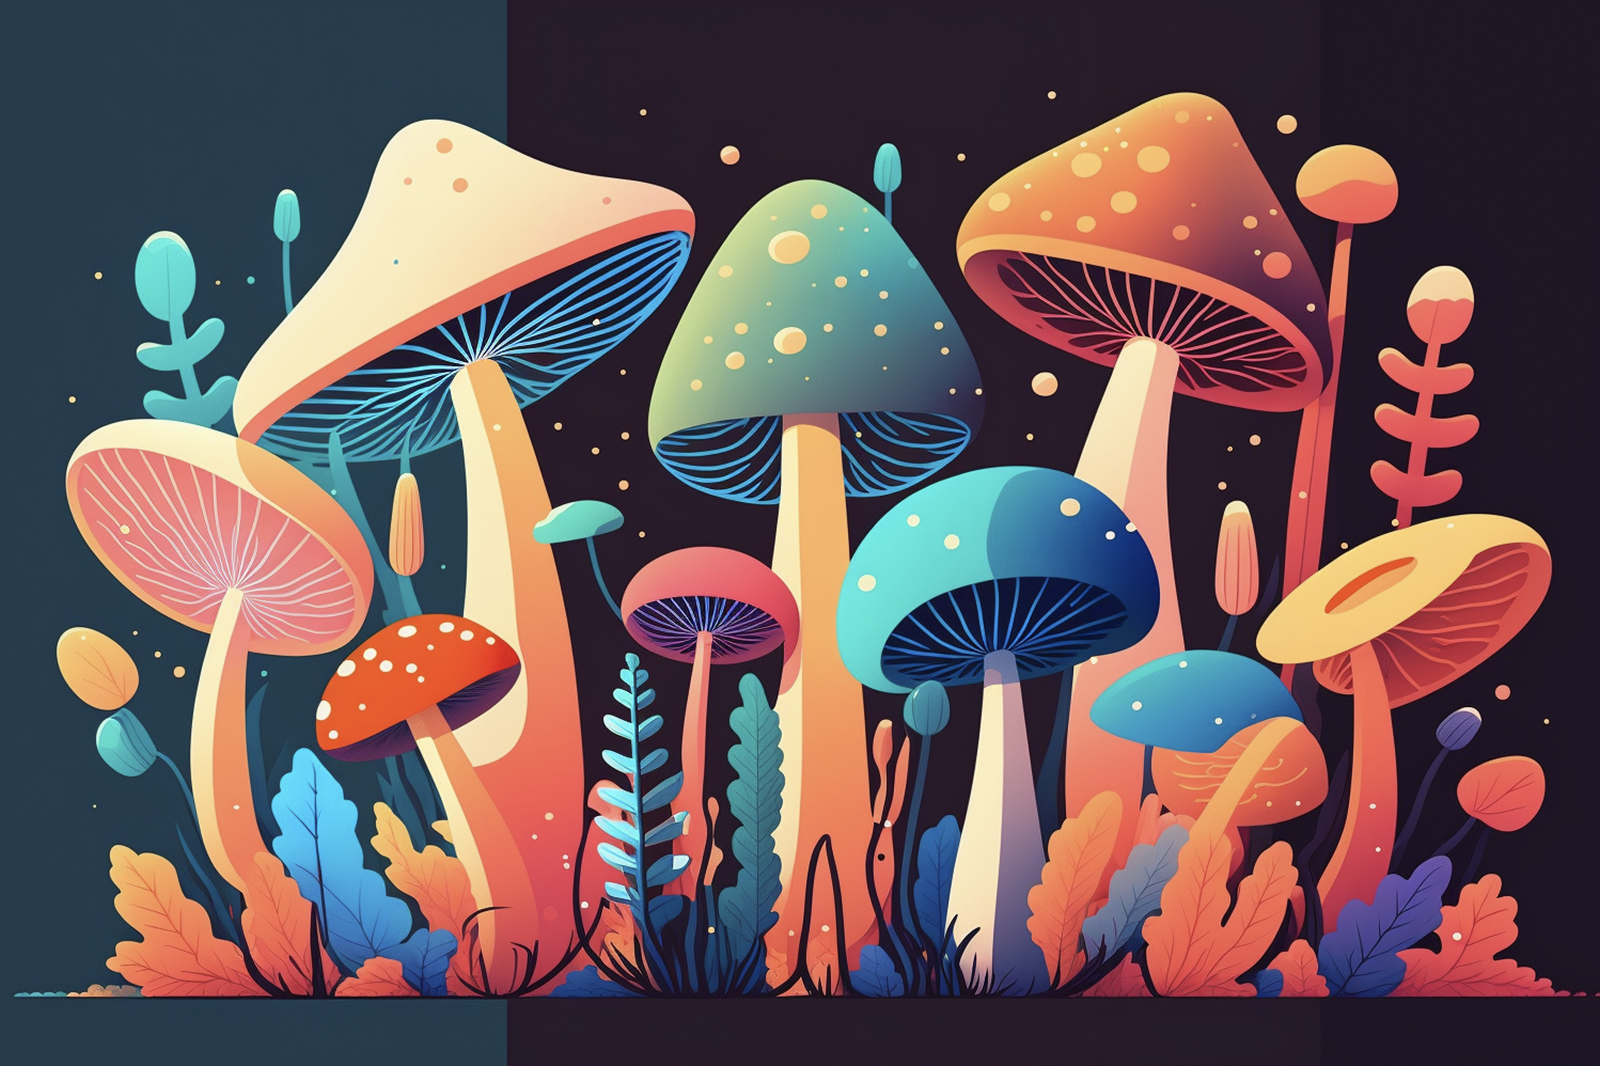 a group of colourfull mushrooms that are standing in the grass